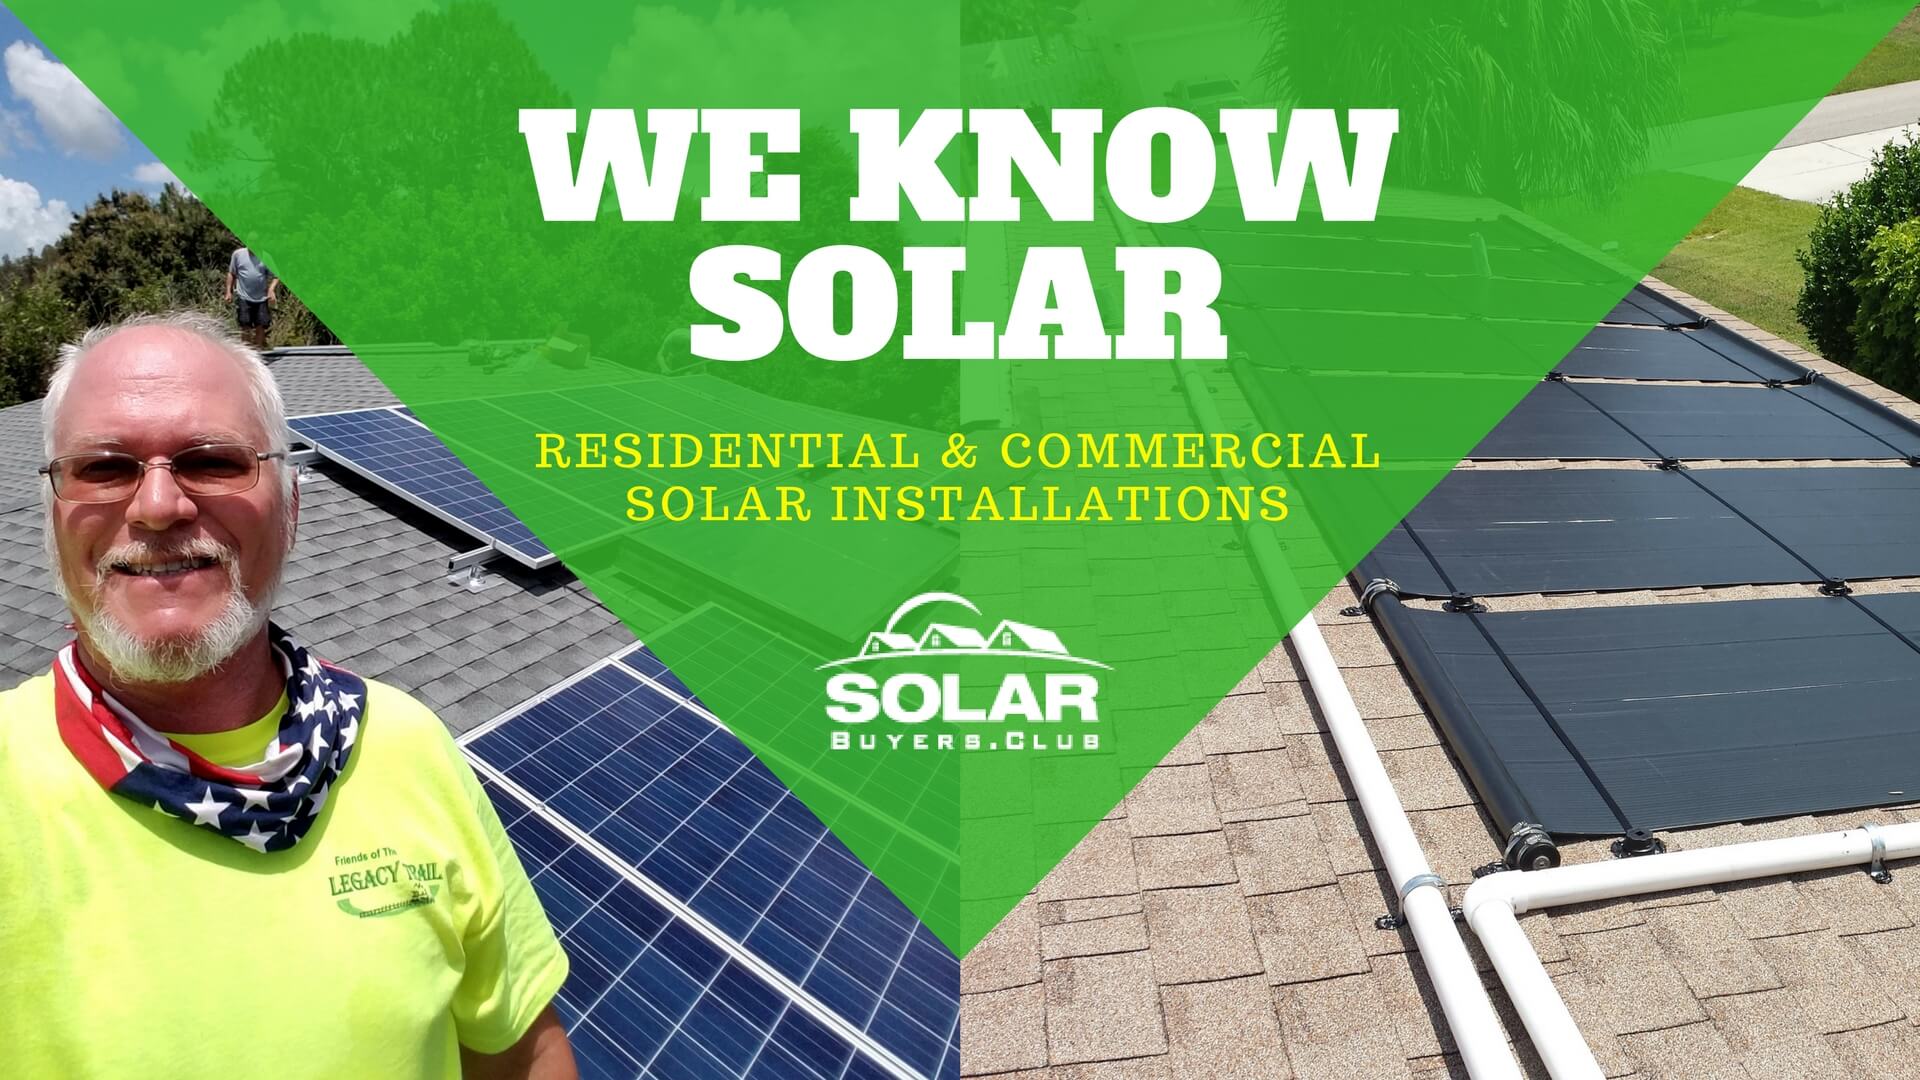 We know solar electric, solar hot water, solar pool heating for your home or business.